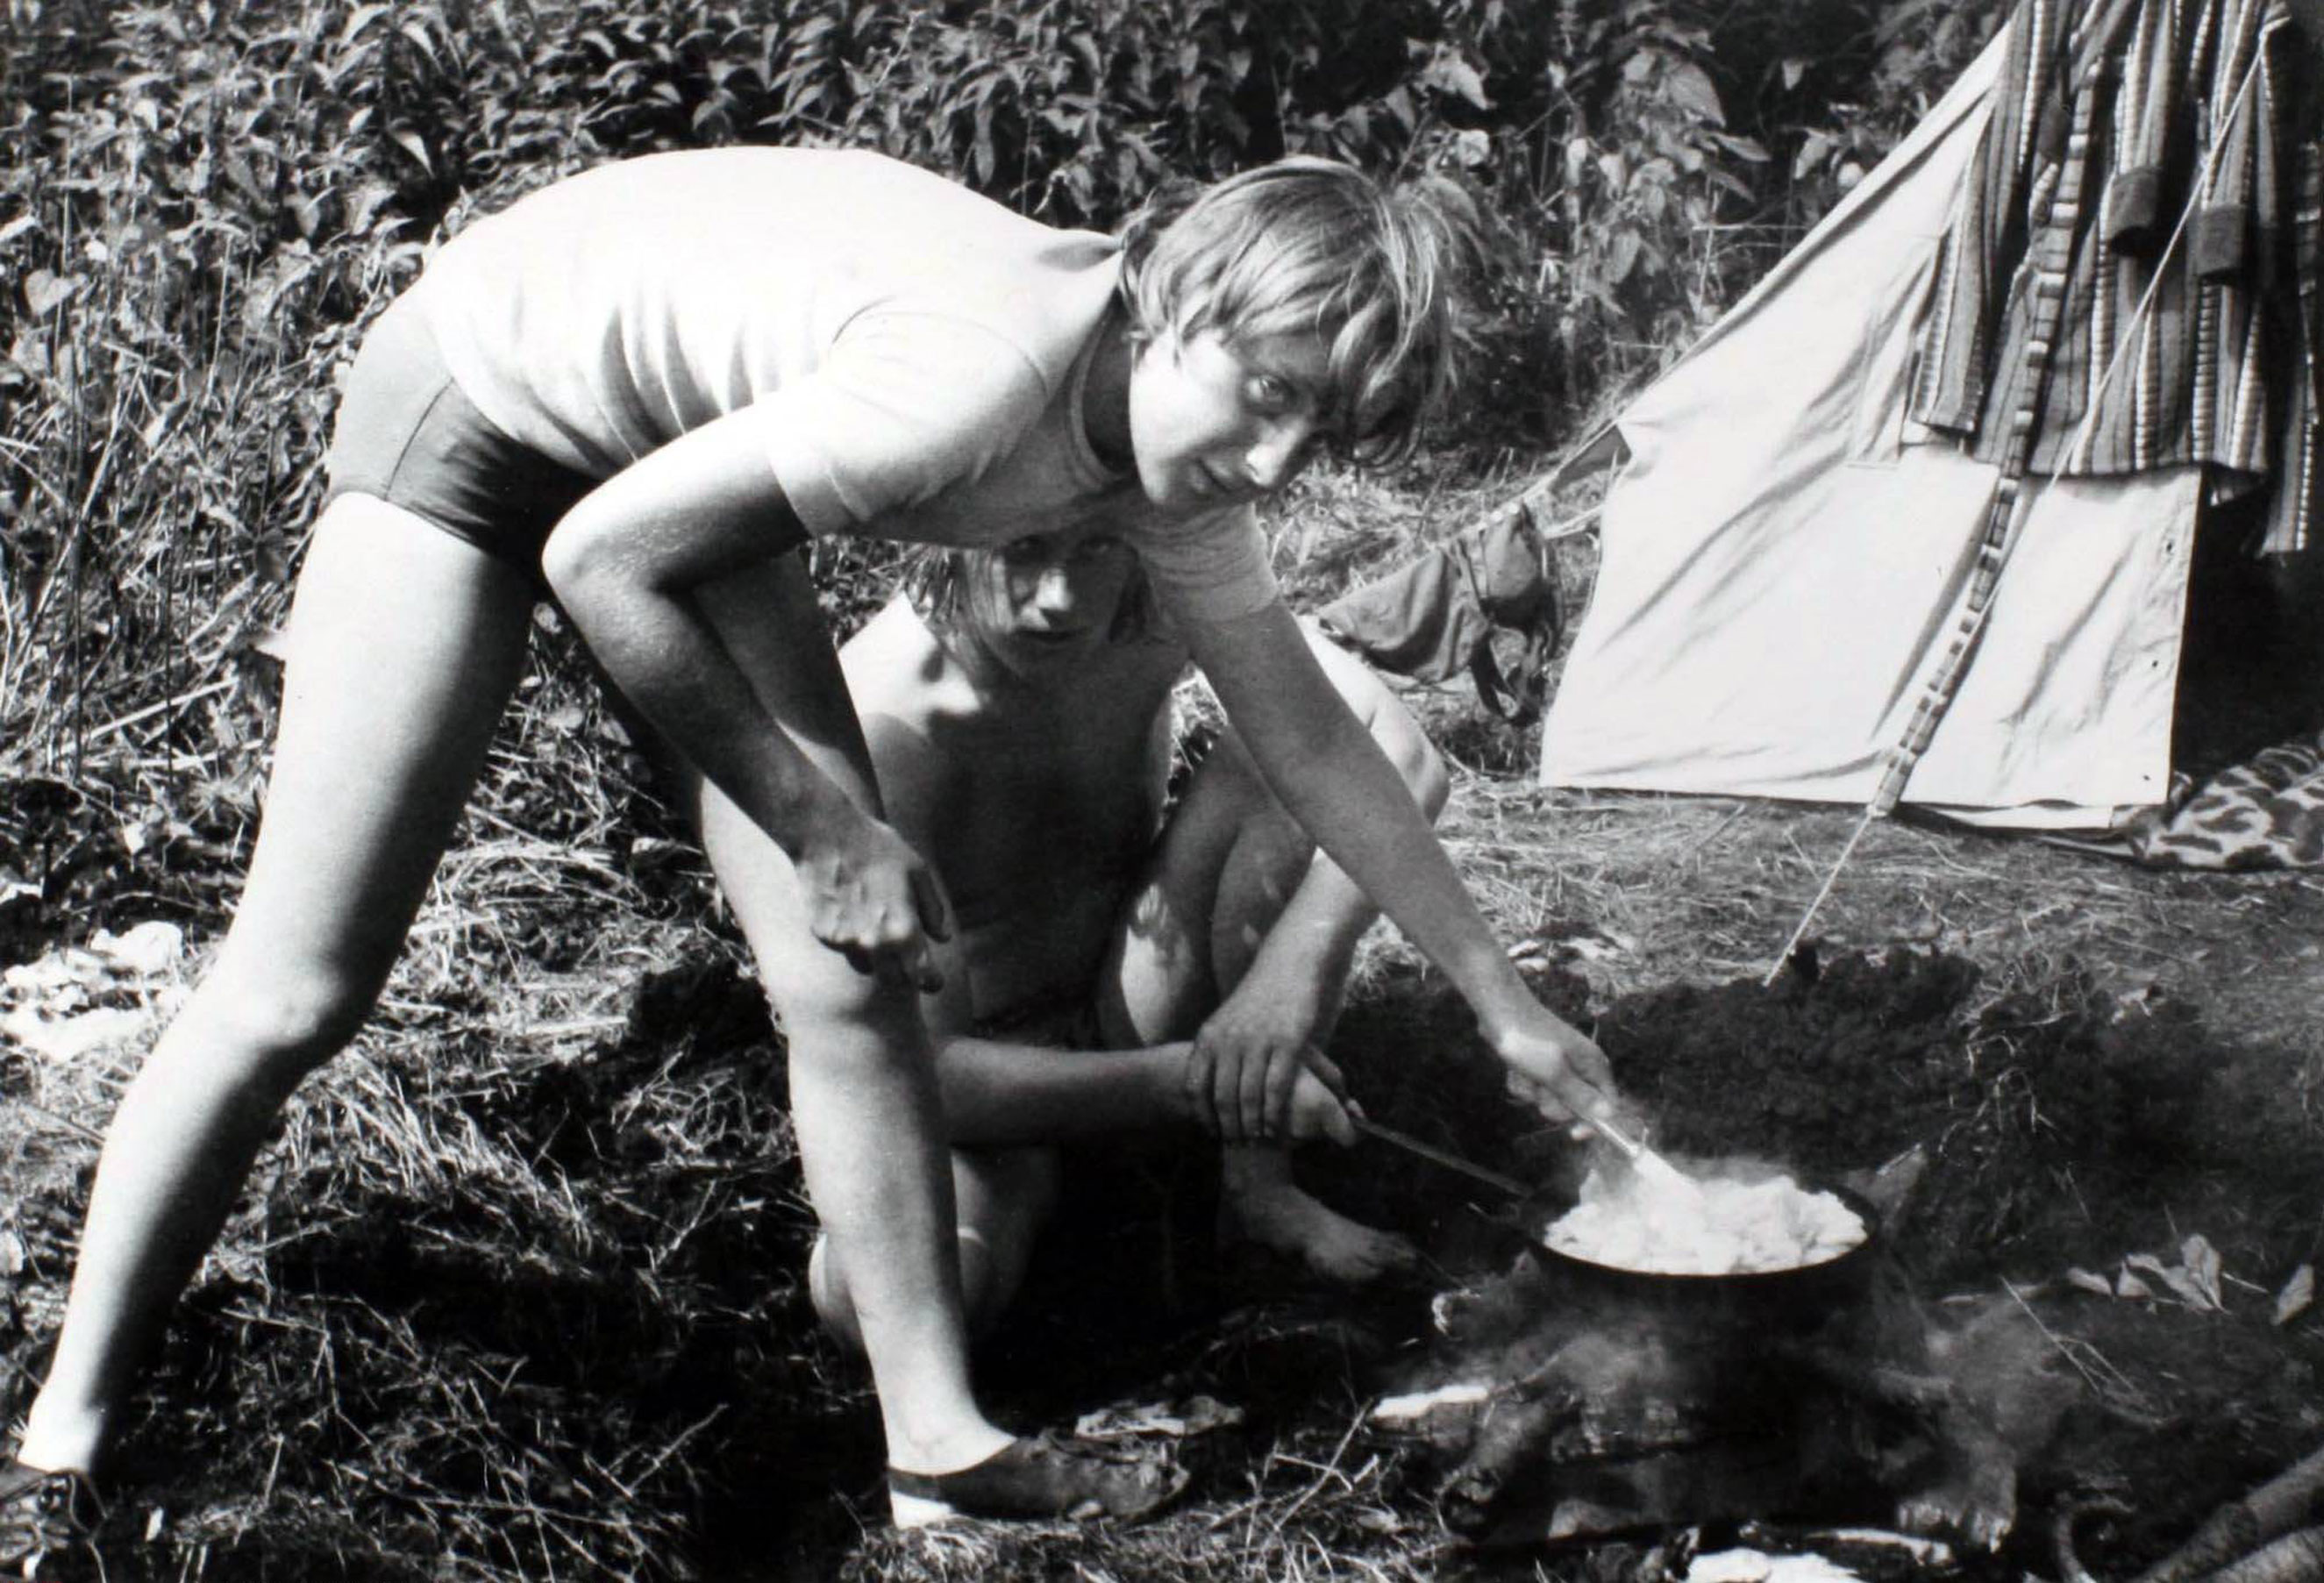 Angela Kasner prepares a meal on a campfire while camping with friends in Himmelpfort, German Democratic Republic on July 1973.